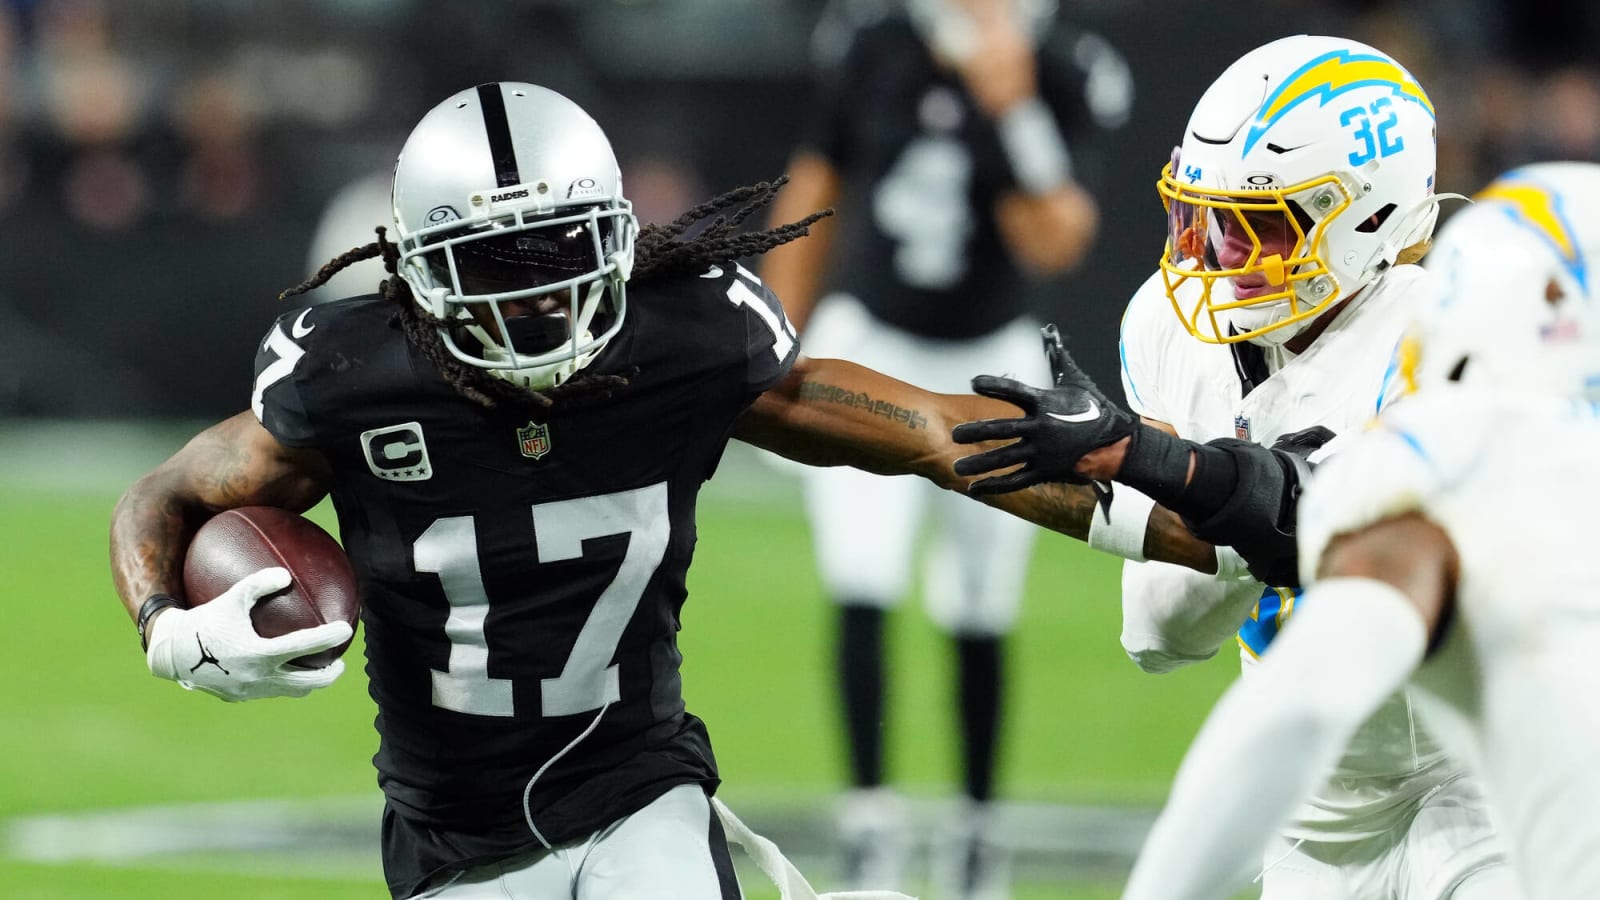 Davante Adams Isn’t Worried About Raiders Playoff Scenarios; Stay 'In The Moment'